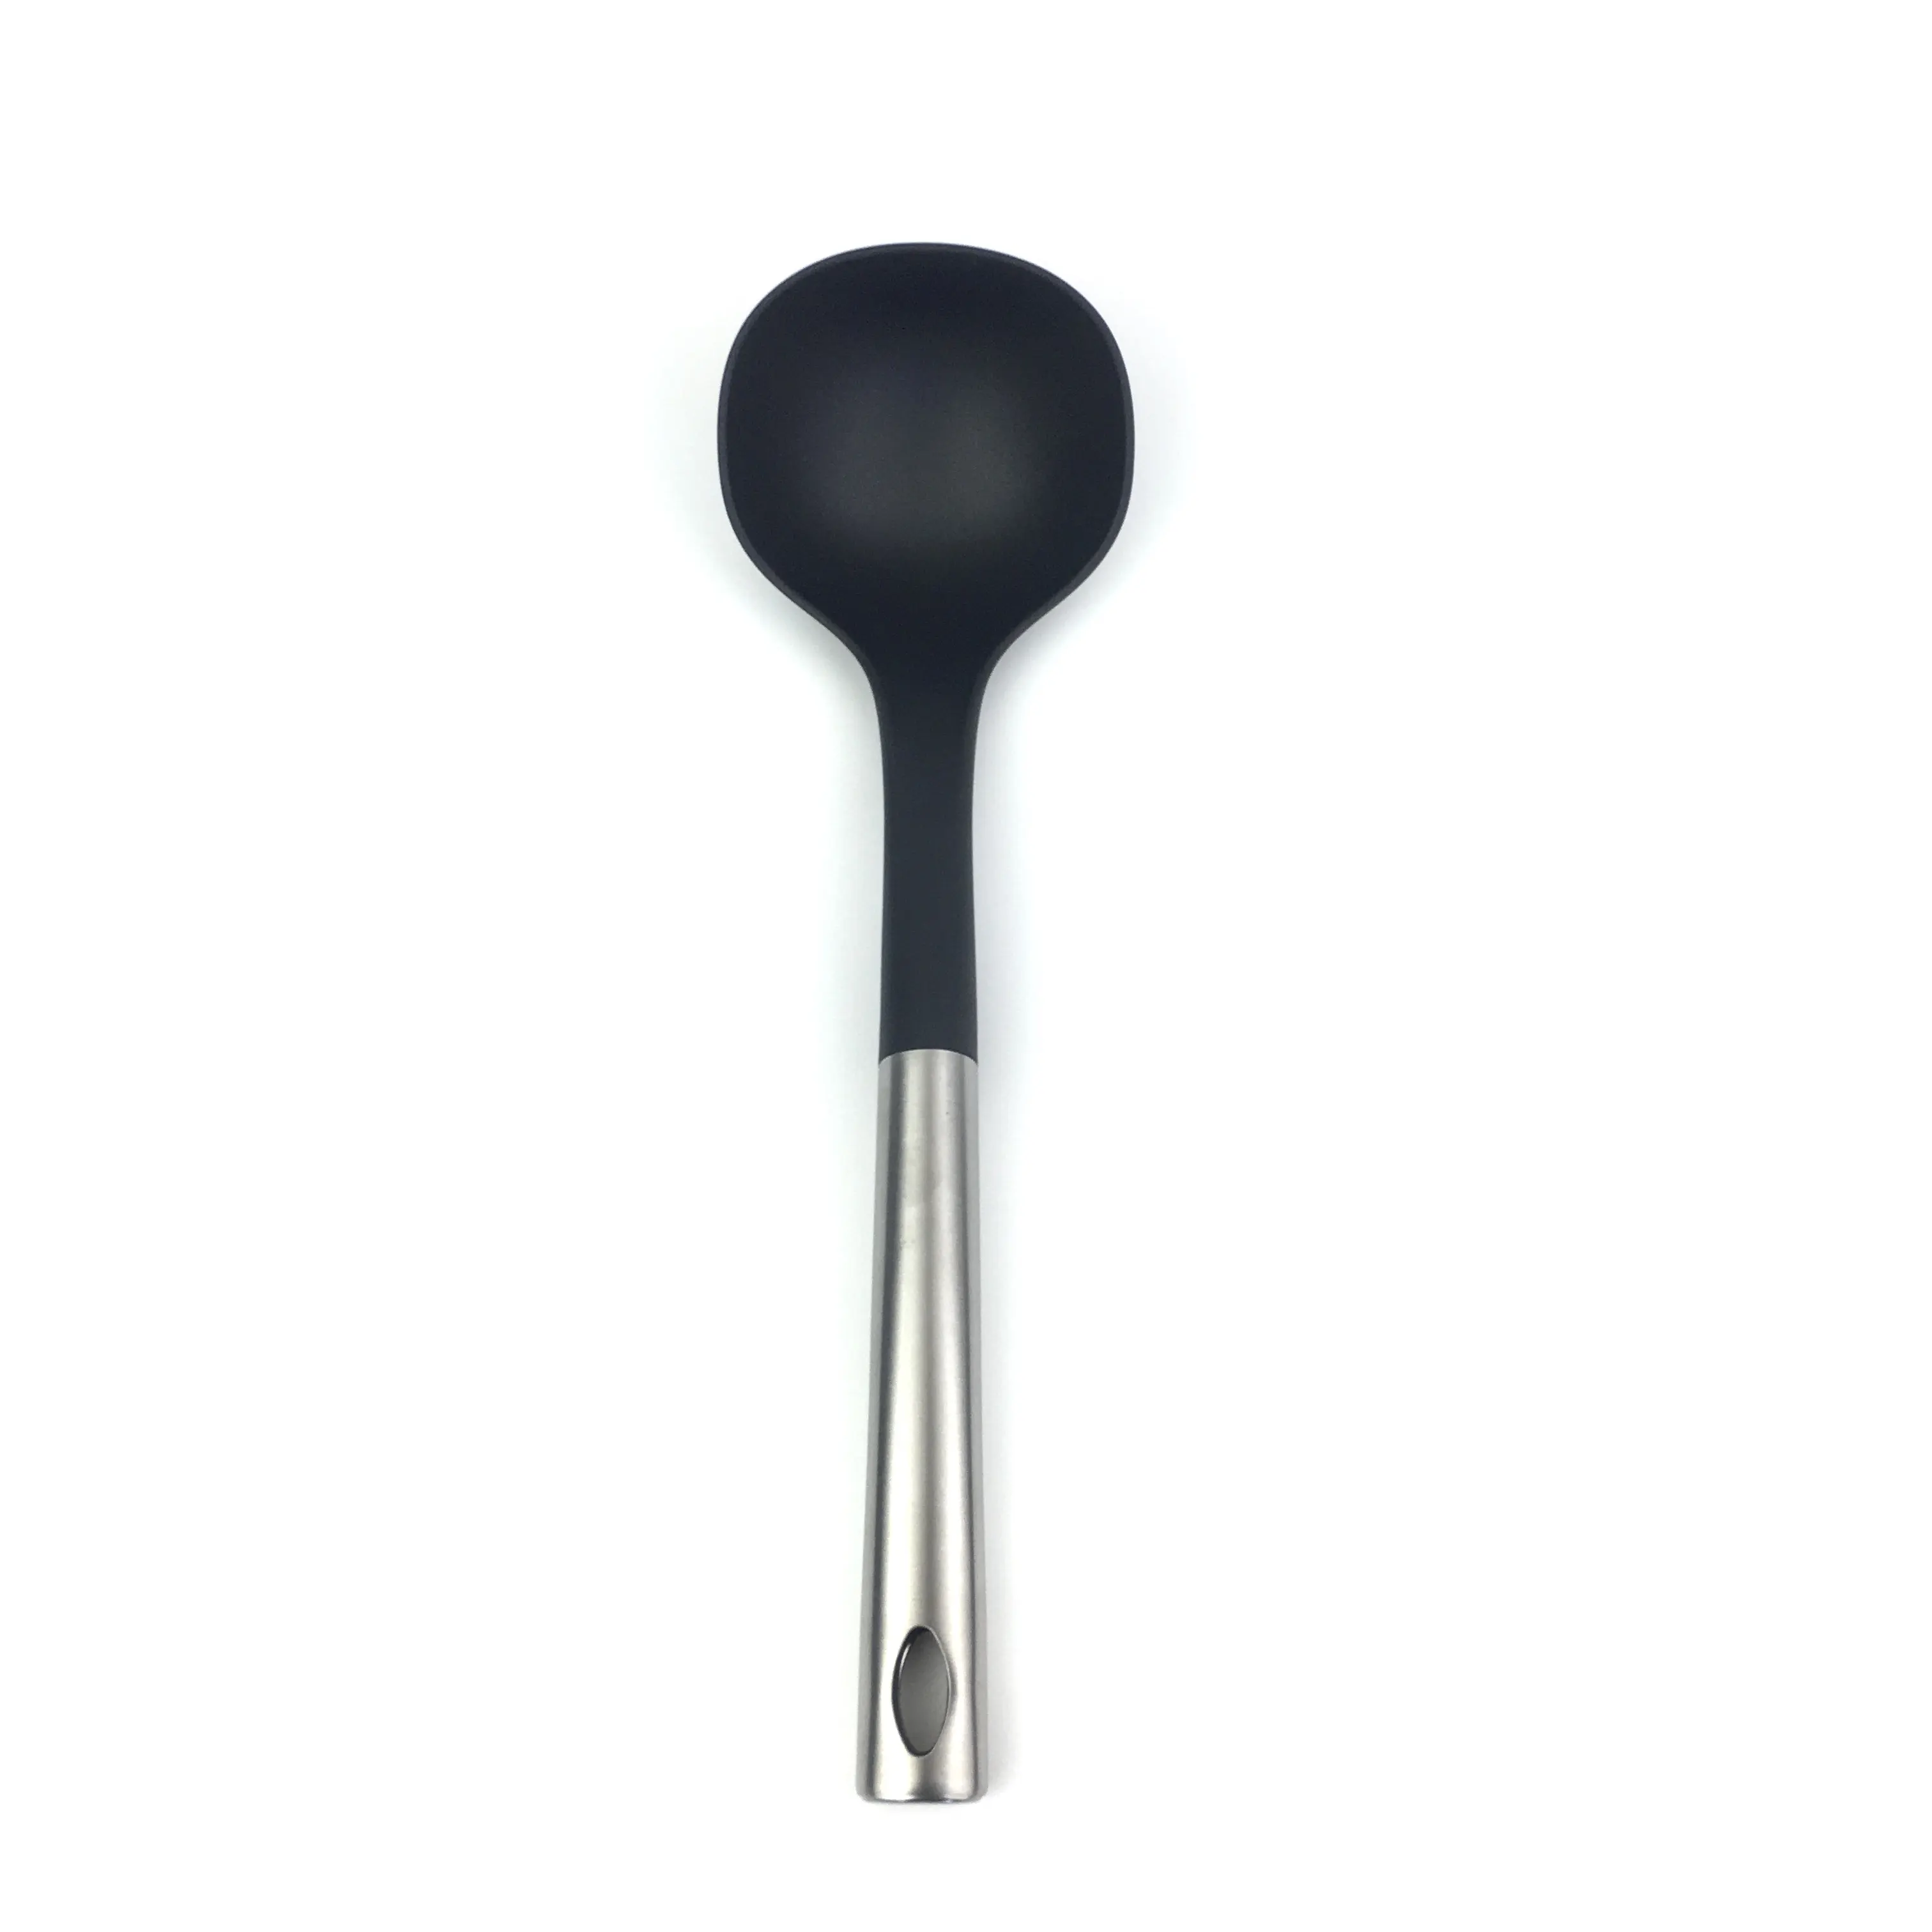 Hot sale high quality Kitchen Utensils tools ss Handle Nylon food safe